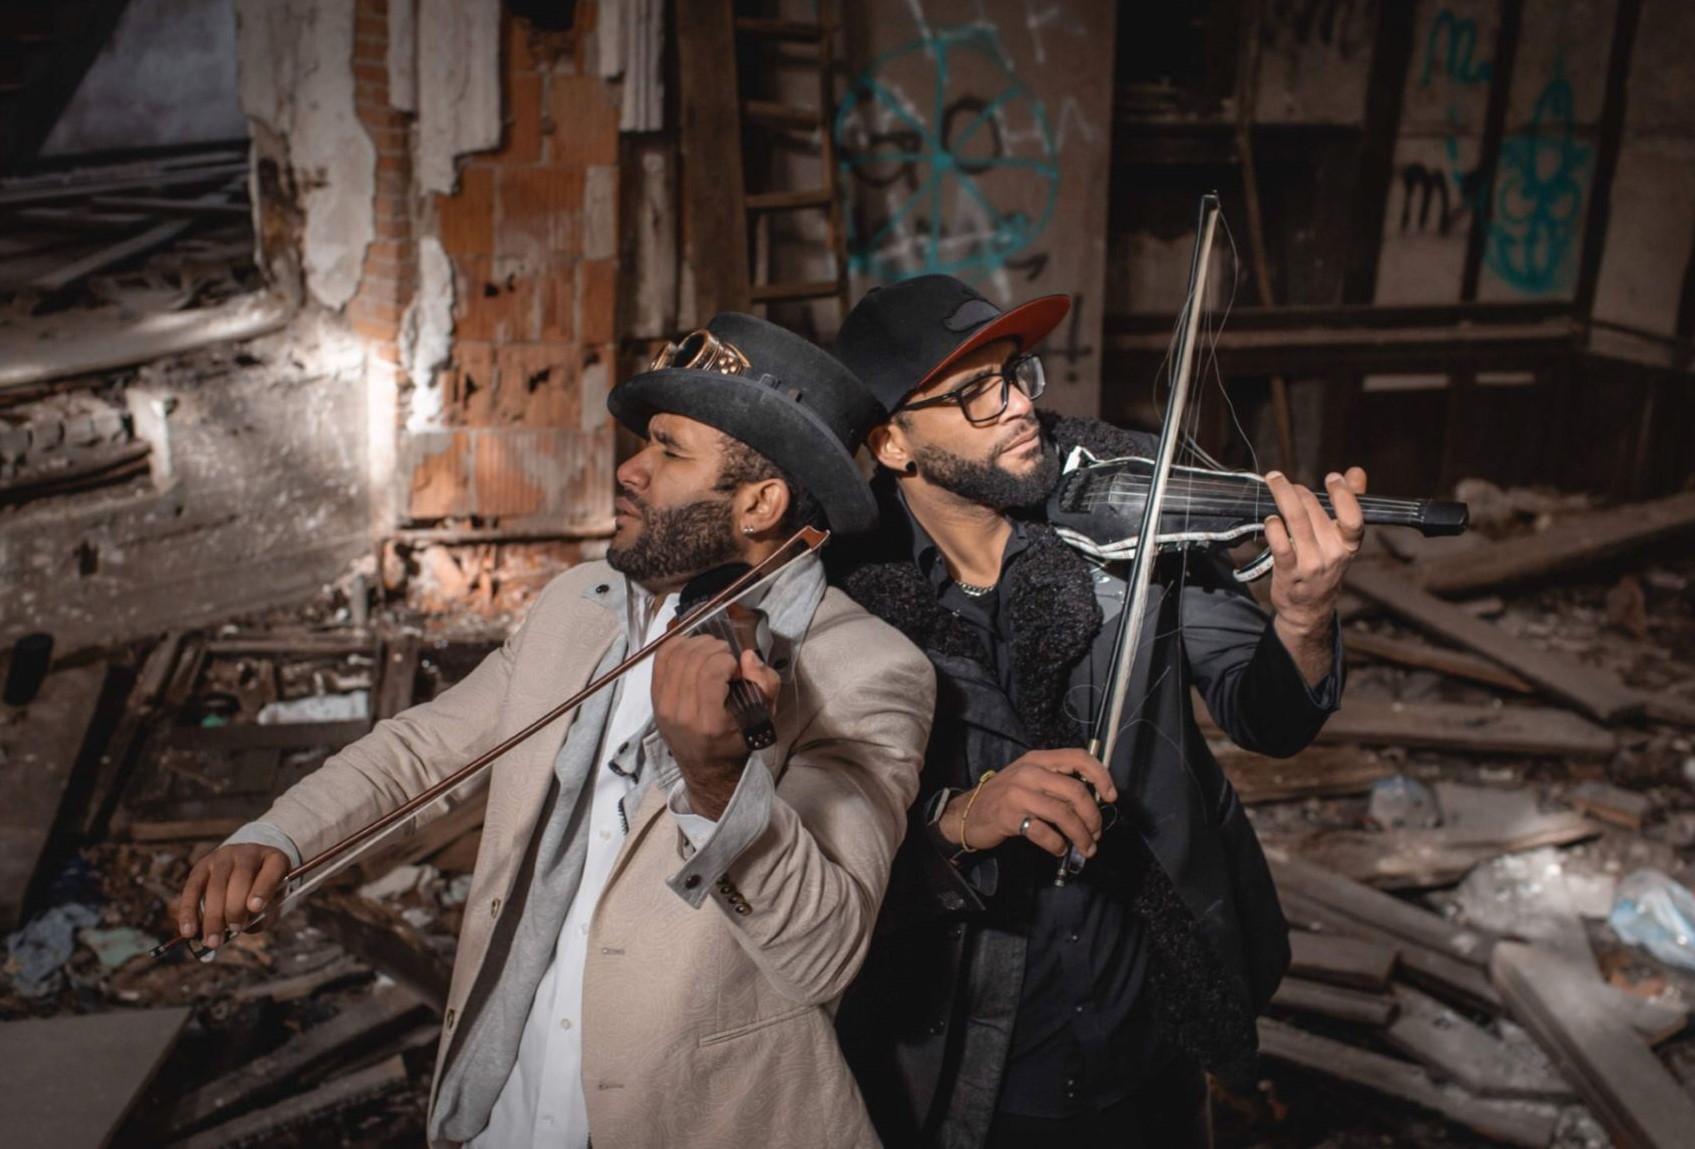 Musicians Walter and Wagner Caldas, identical twin brothers known as the Brazilian 2wins, headline the annual Artspire community arts celebration Saturday, June 11.